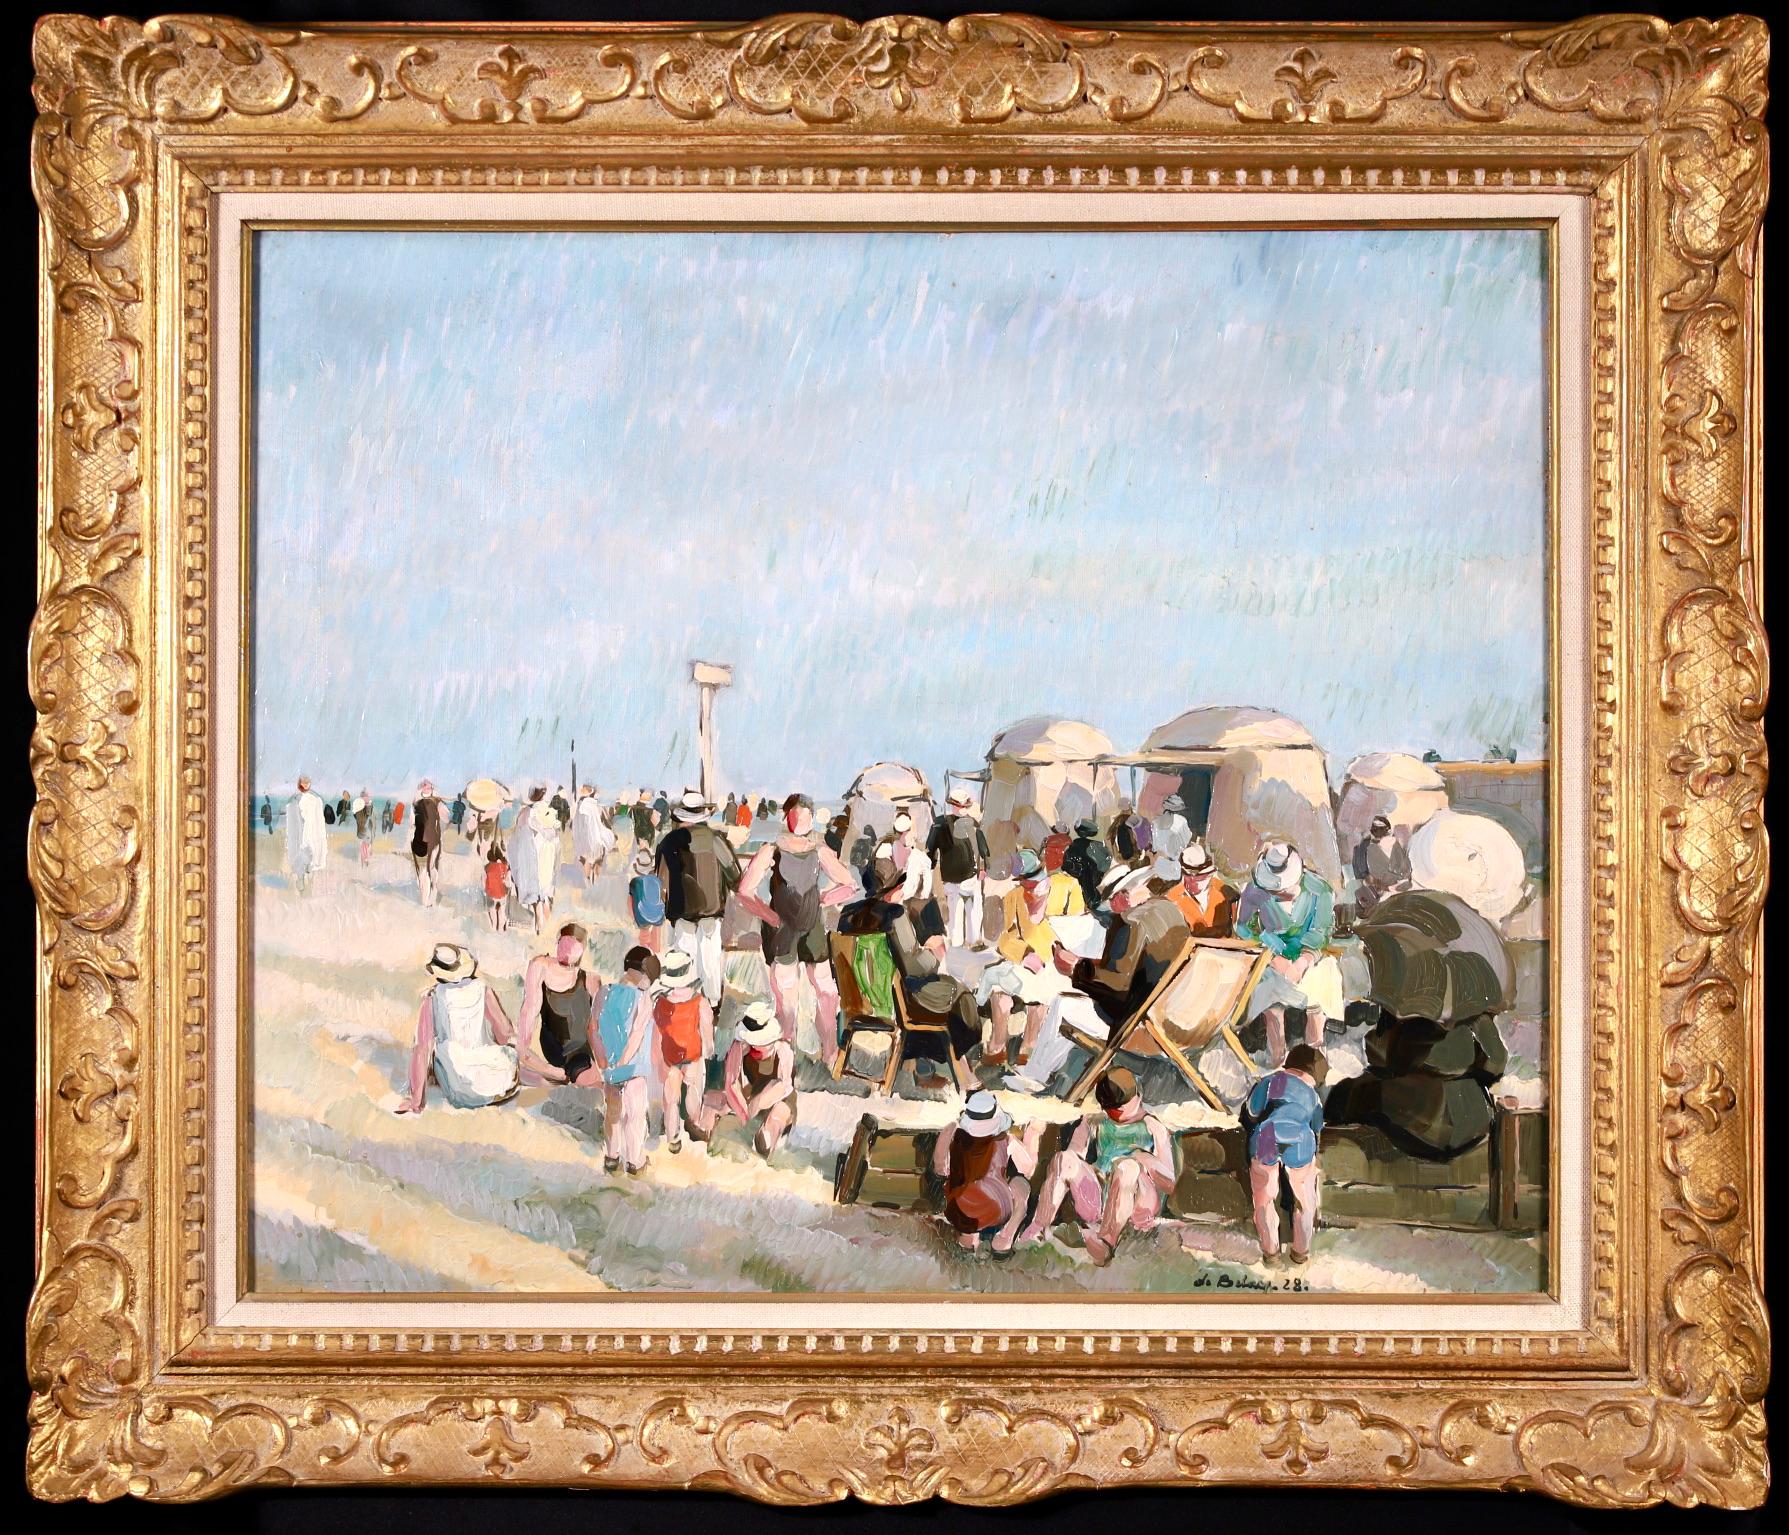 At the Beach - Post Impressionist Oil, Figures in Landscape by Pierre de Belay